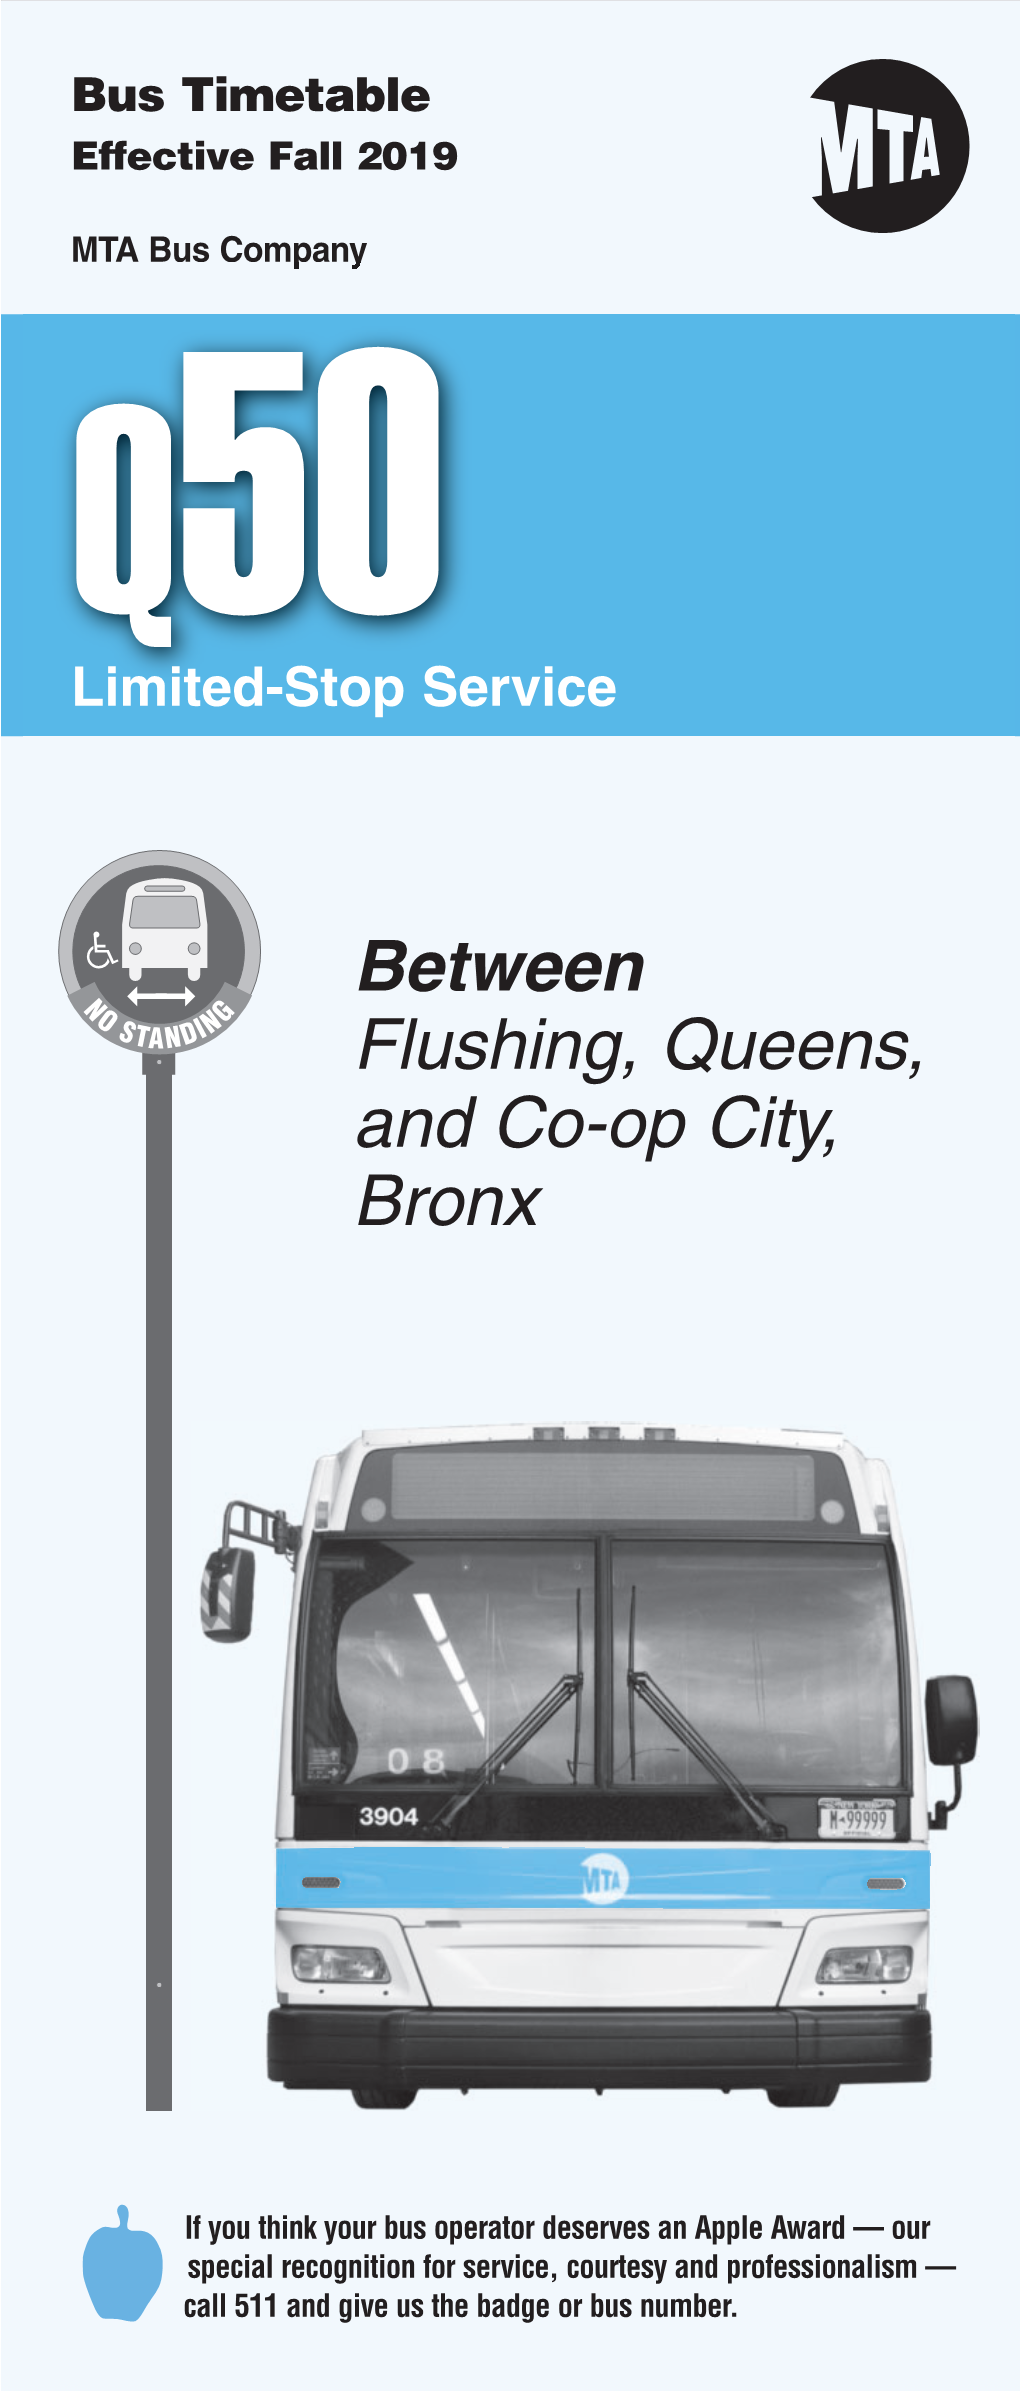 Between Flushing, Queens, and Co-Op City, Bronx